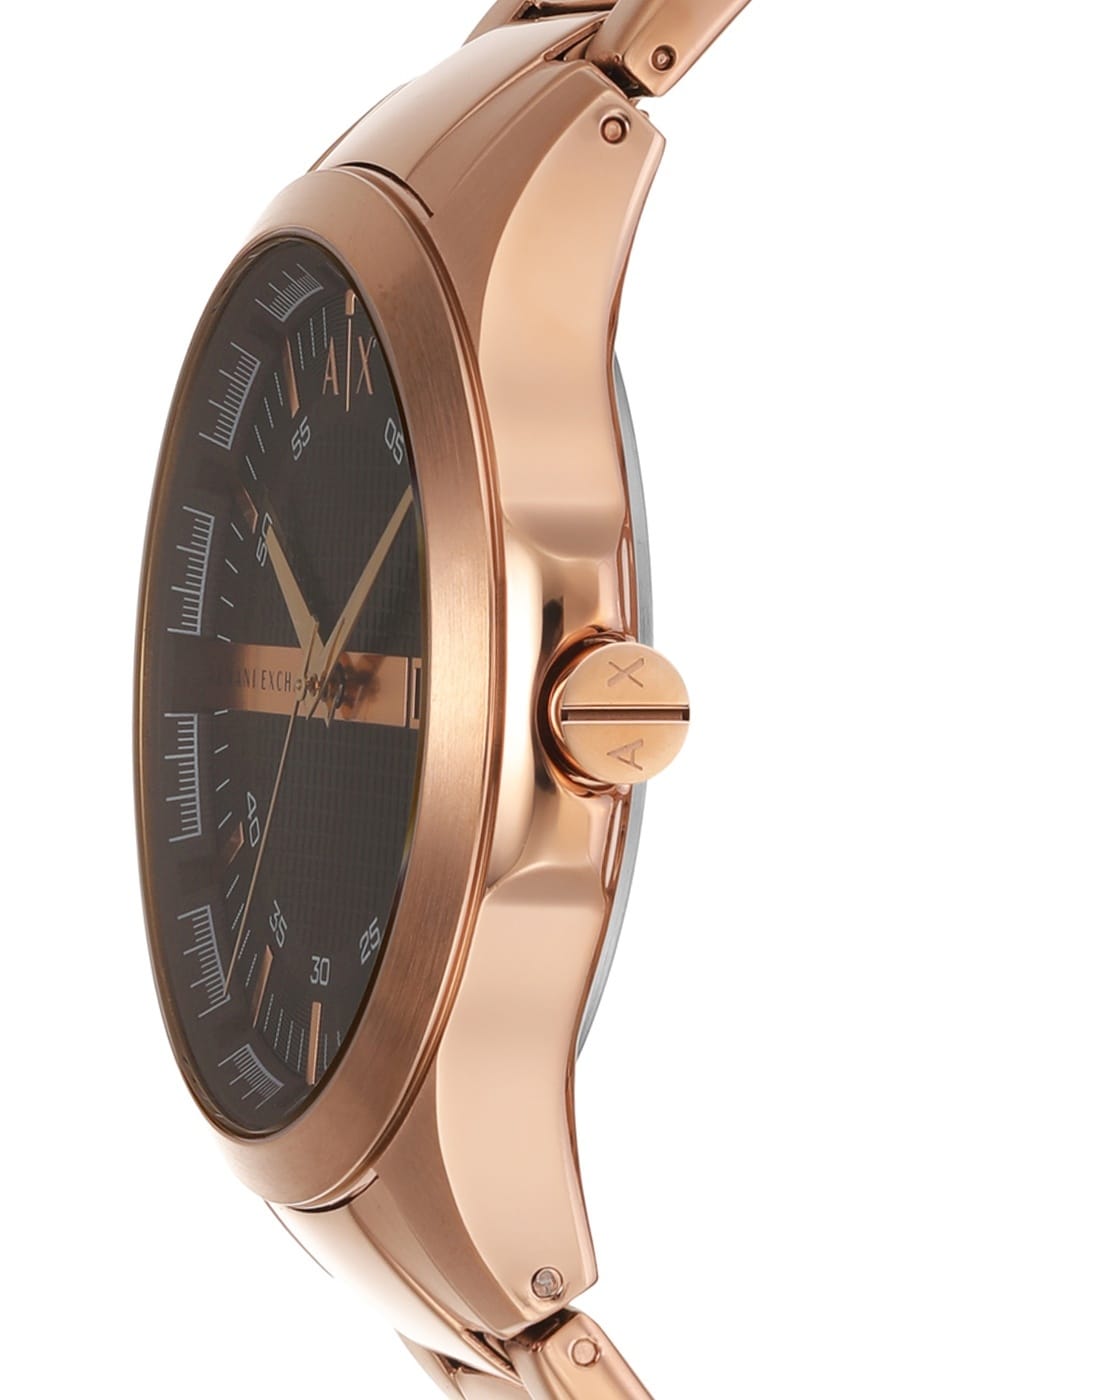 EXCHANGE Gold Buy by Online Rose Watches Men for ARMANI